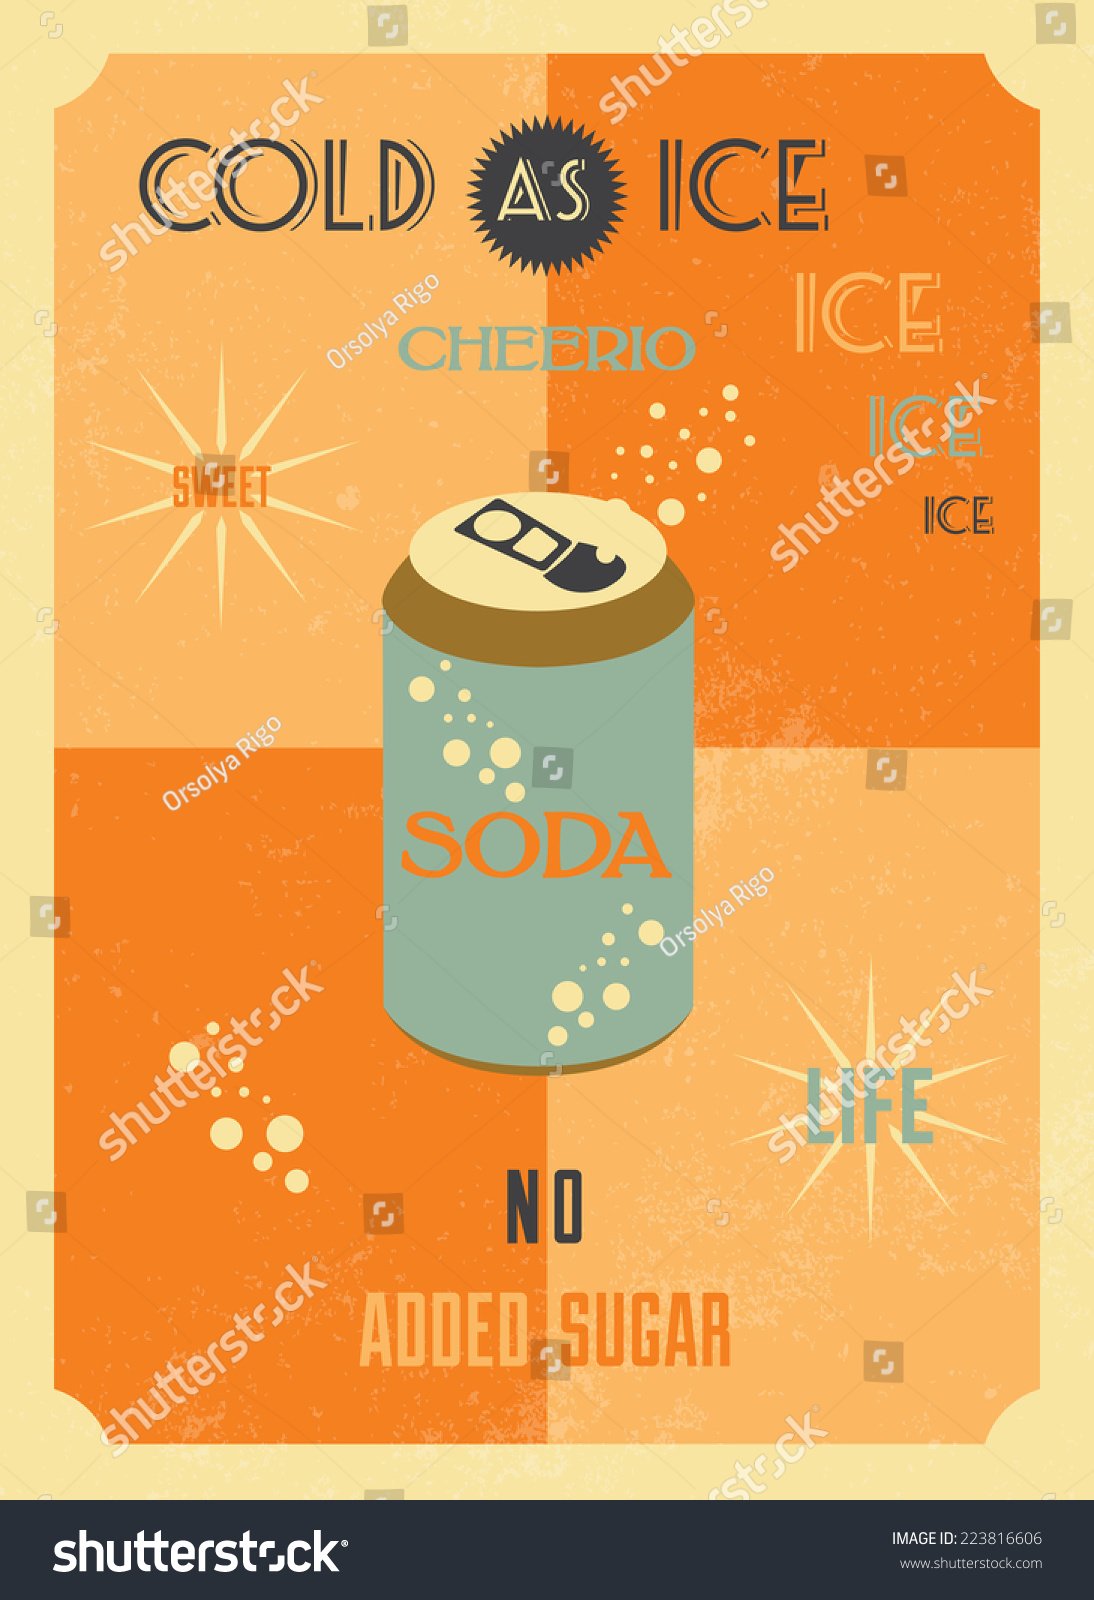 SVG of Soda vintage poster in flat design style / Soda poster with COLD AS ICE, CHEERIO, SWEET LIFE, NO ADDED SUGAR inscription / Typographic vector illustration svg